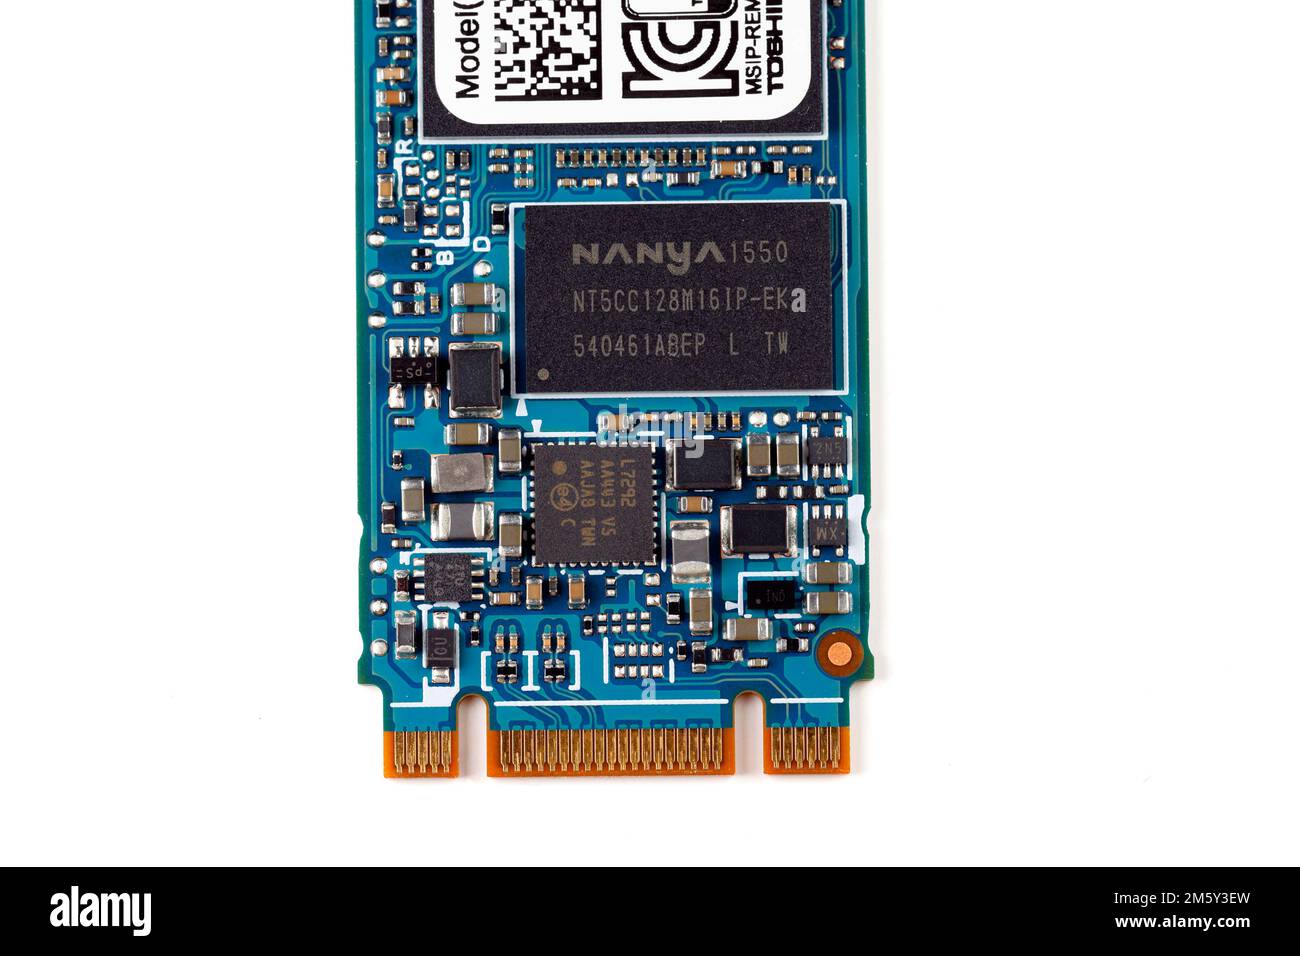 A Nanya Technology SDRAM memory chip on a M.2 SSD isolated on a white background. Nanya Technology is a Taiwanese DRAM chipmaker. Stock Photo